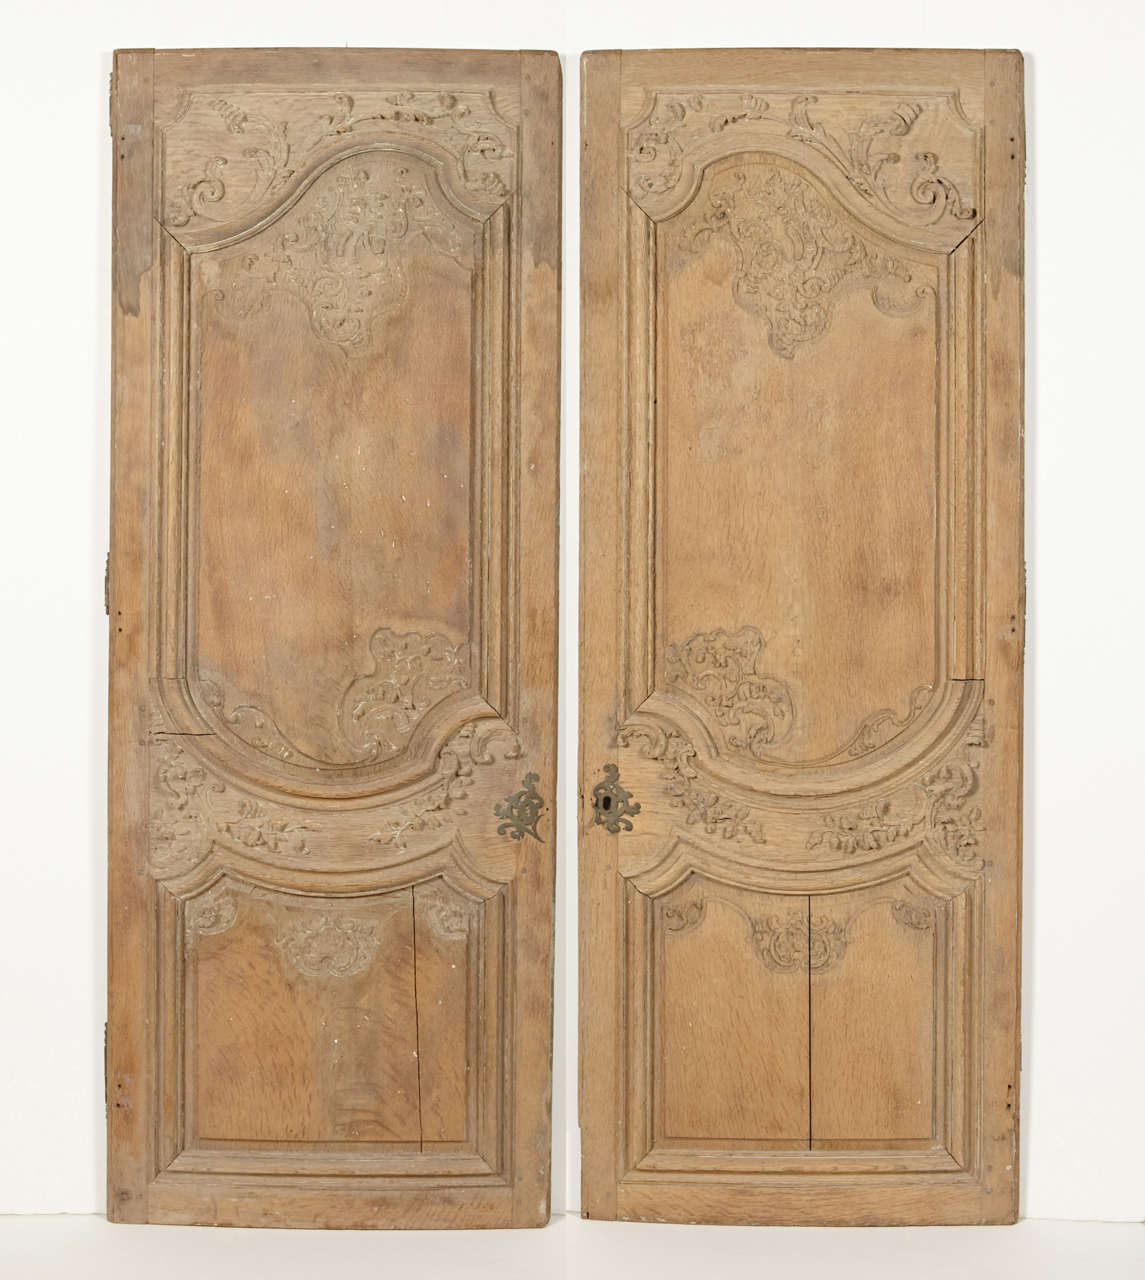 These beautifully hand-carved armoire doors are from the French Regence period (1715-1723). The front sides have been stripped at some point in their history, while the backs are painted in a cream color. Each door has a very subtle bow